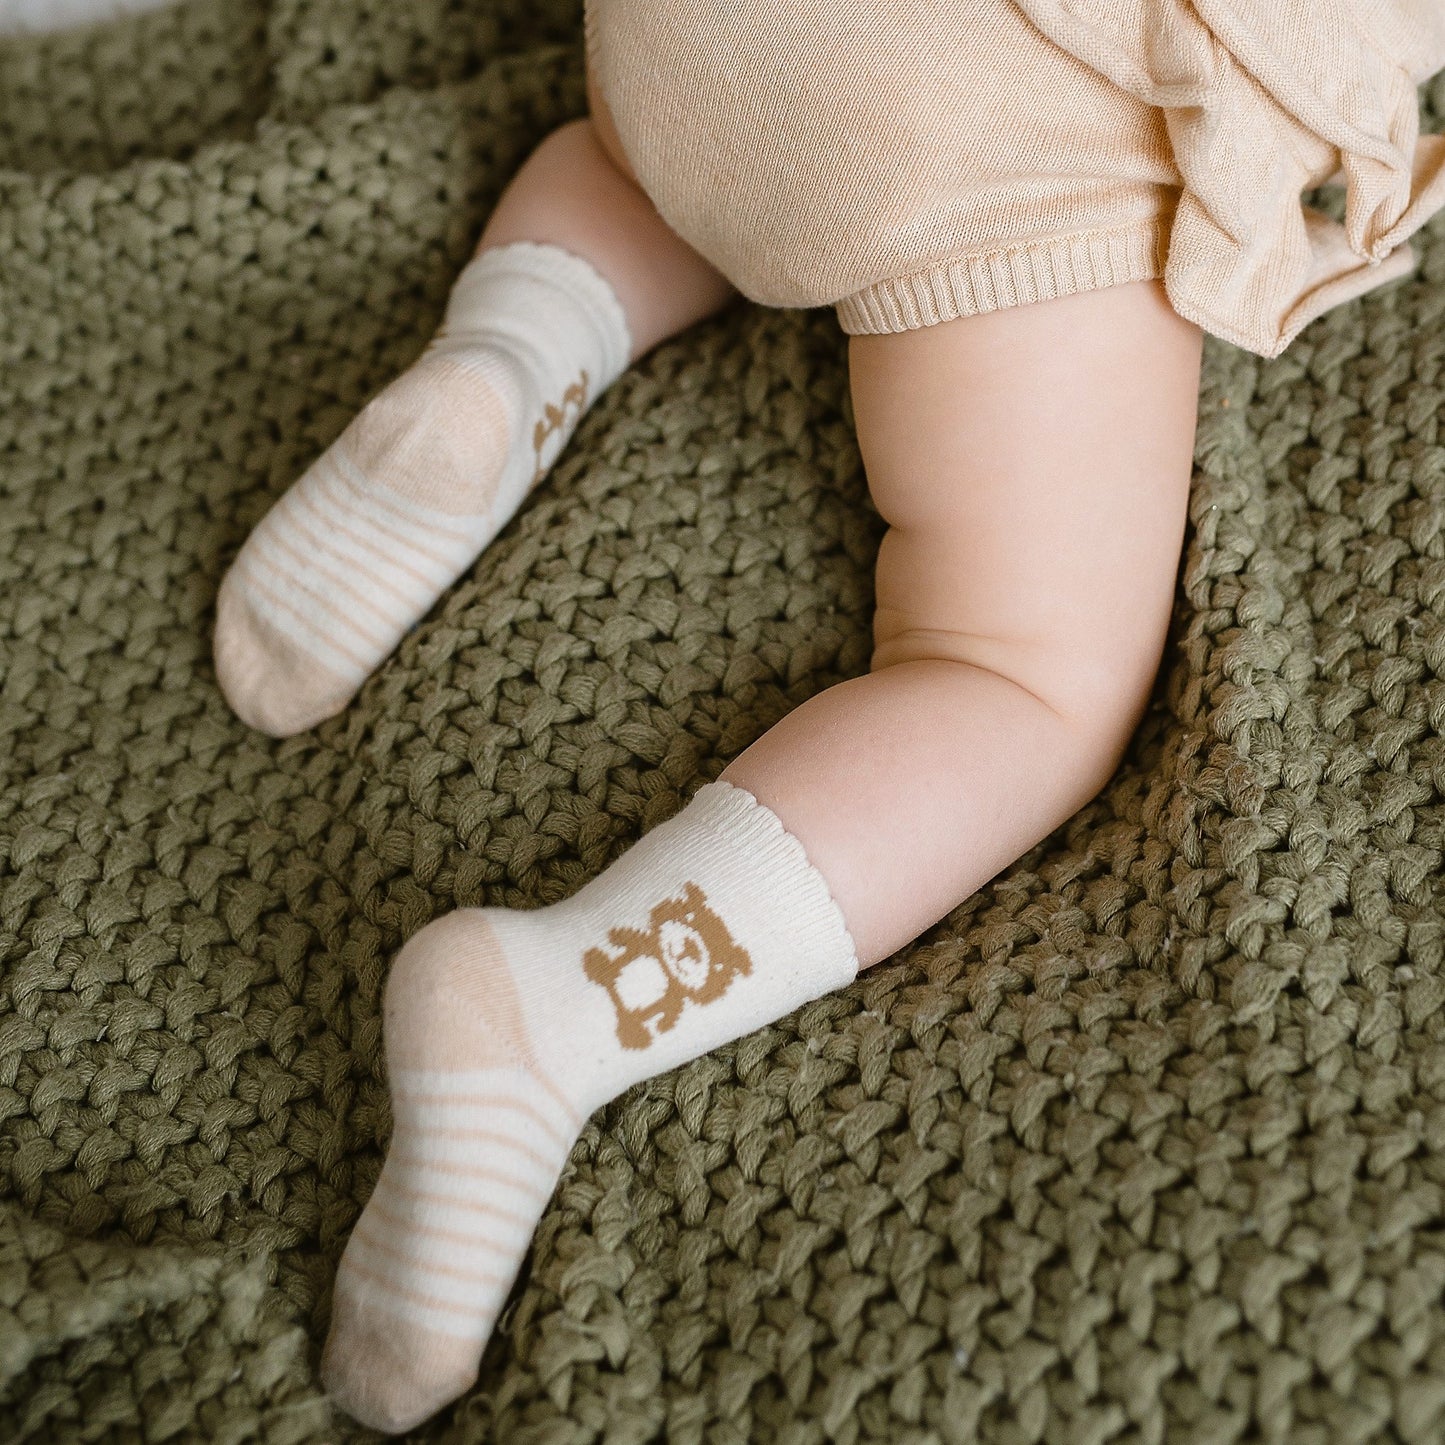 Adorable Organic Infant Socks That Stay On